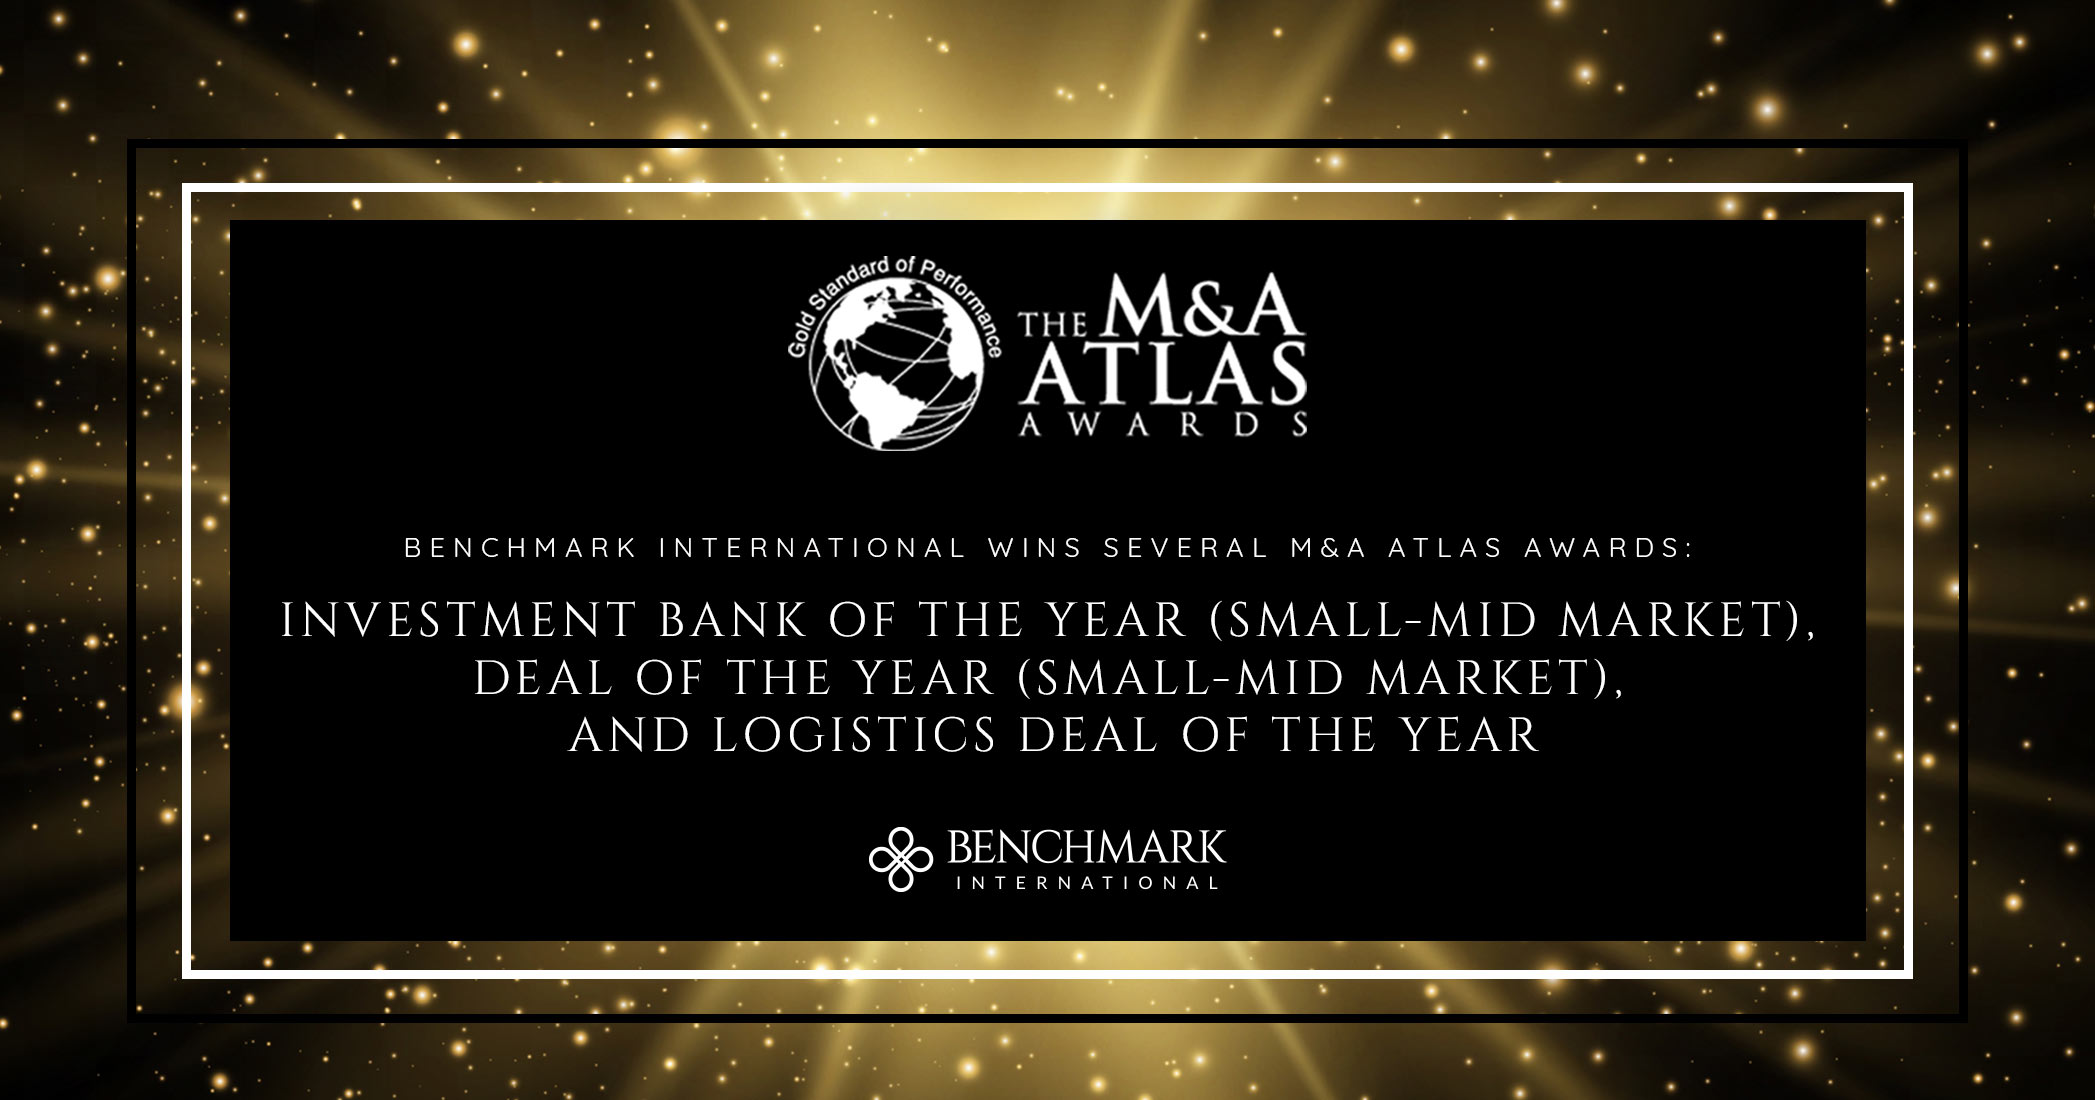 Benchmark International Wins Several M&A Atlas Awards: Investment Bank Of The Year (Small-mid Market), Deal Of The Year (Small-mid Market), And Logistics Deal Of The Year